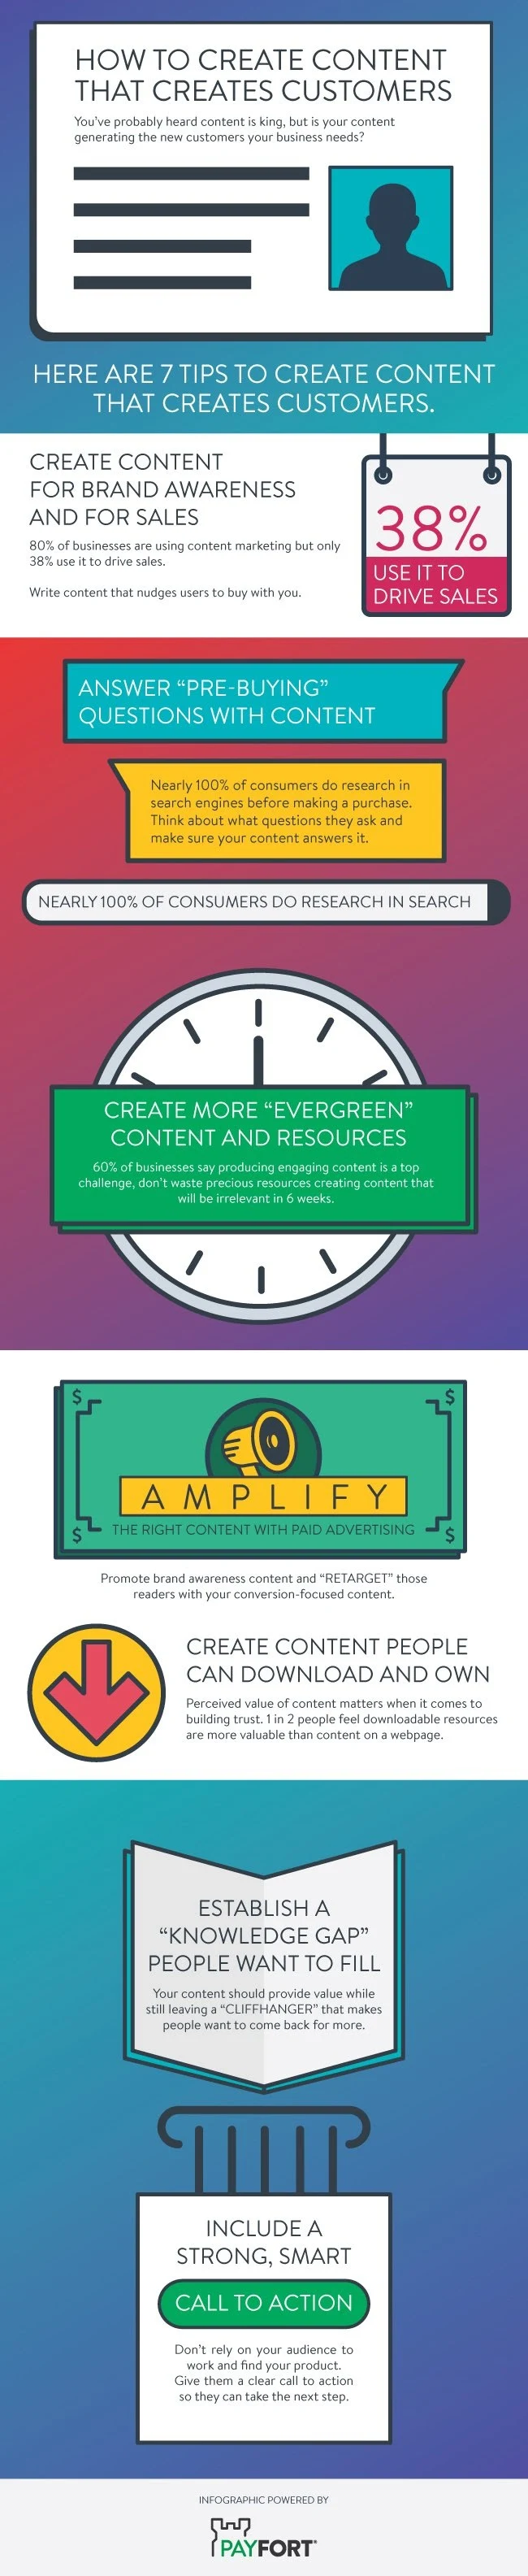 How To Create Content That Creates Customers - #infographic